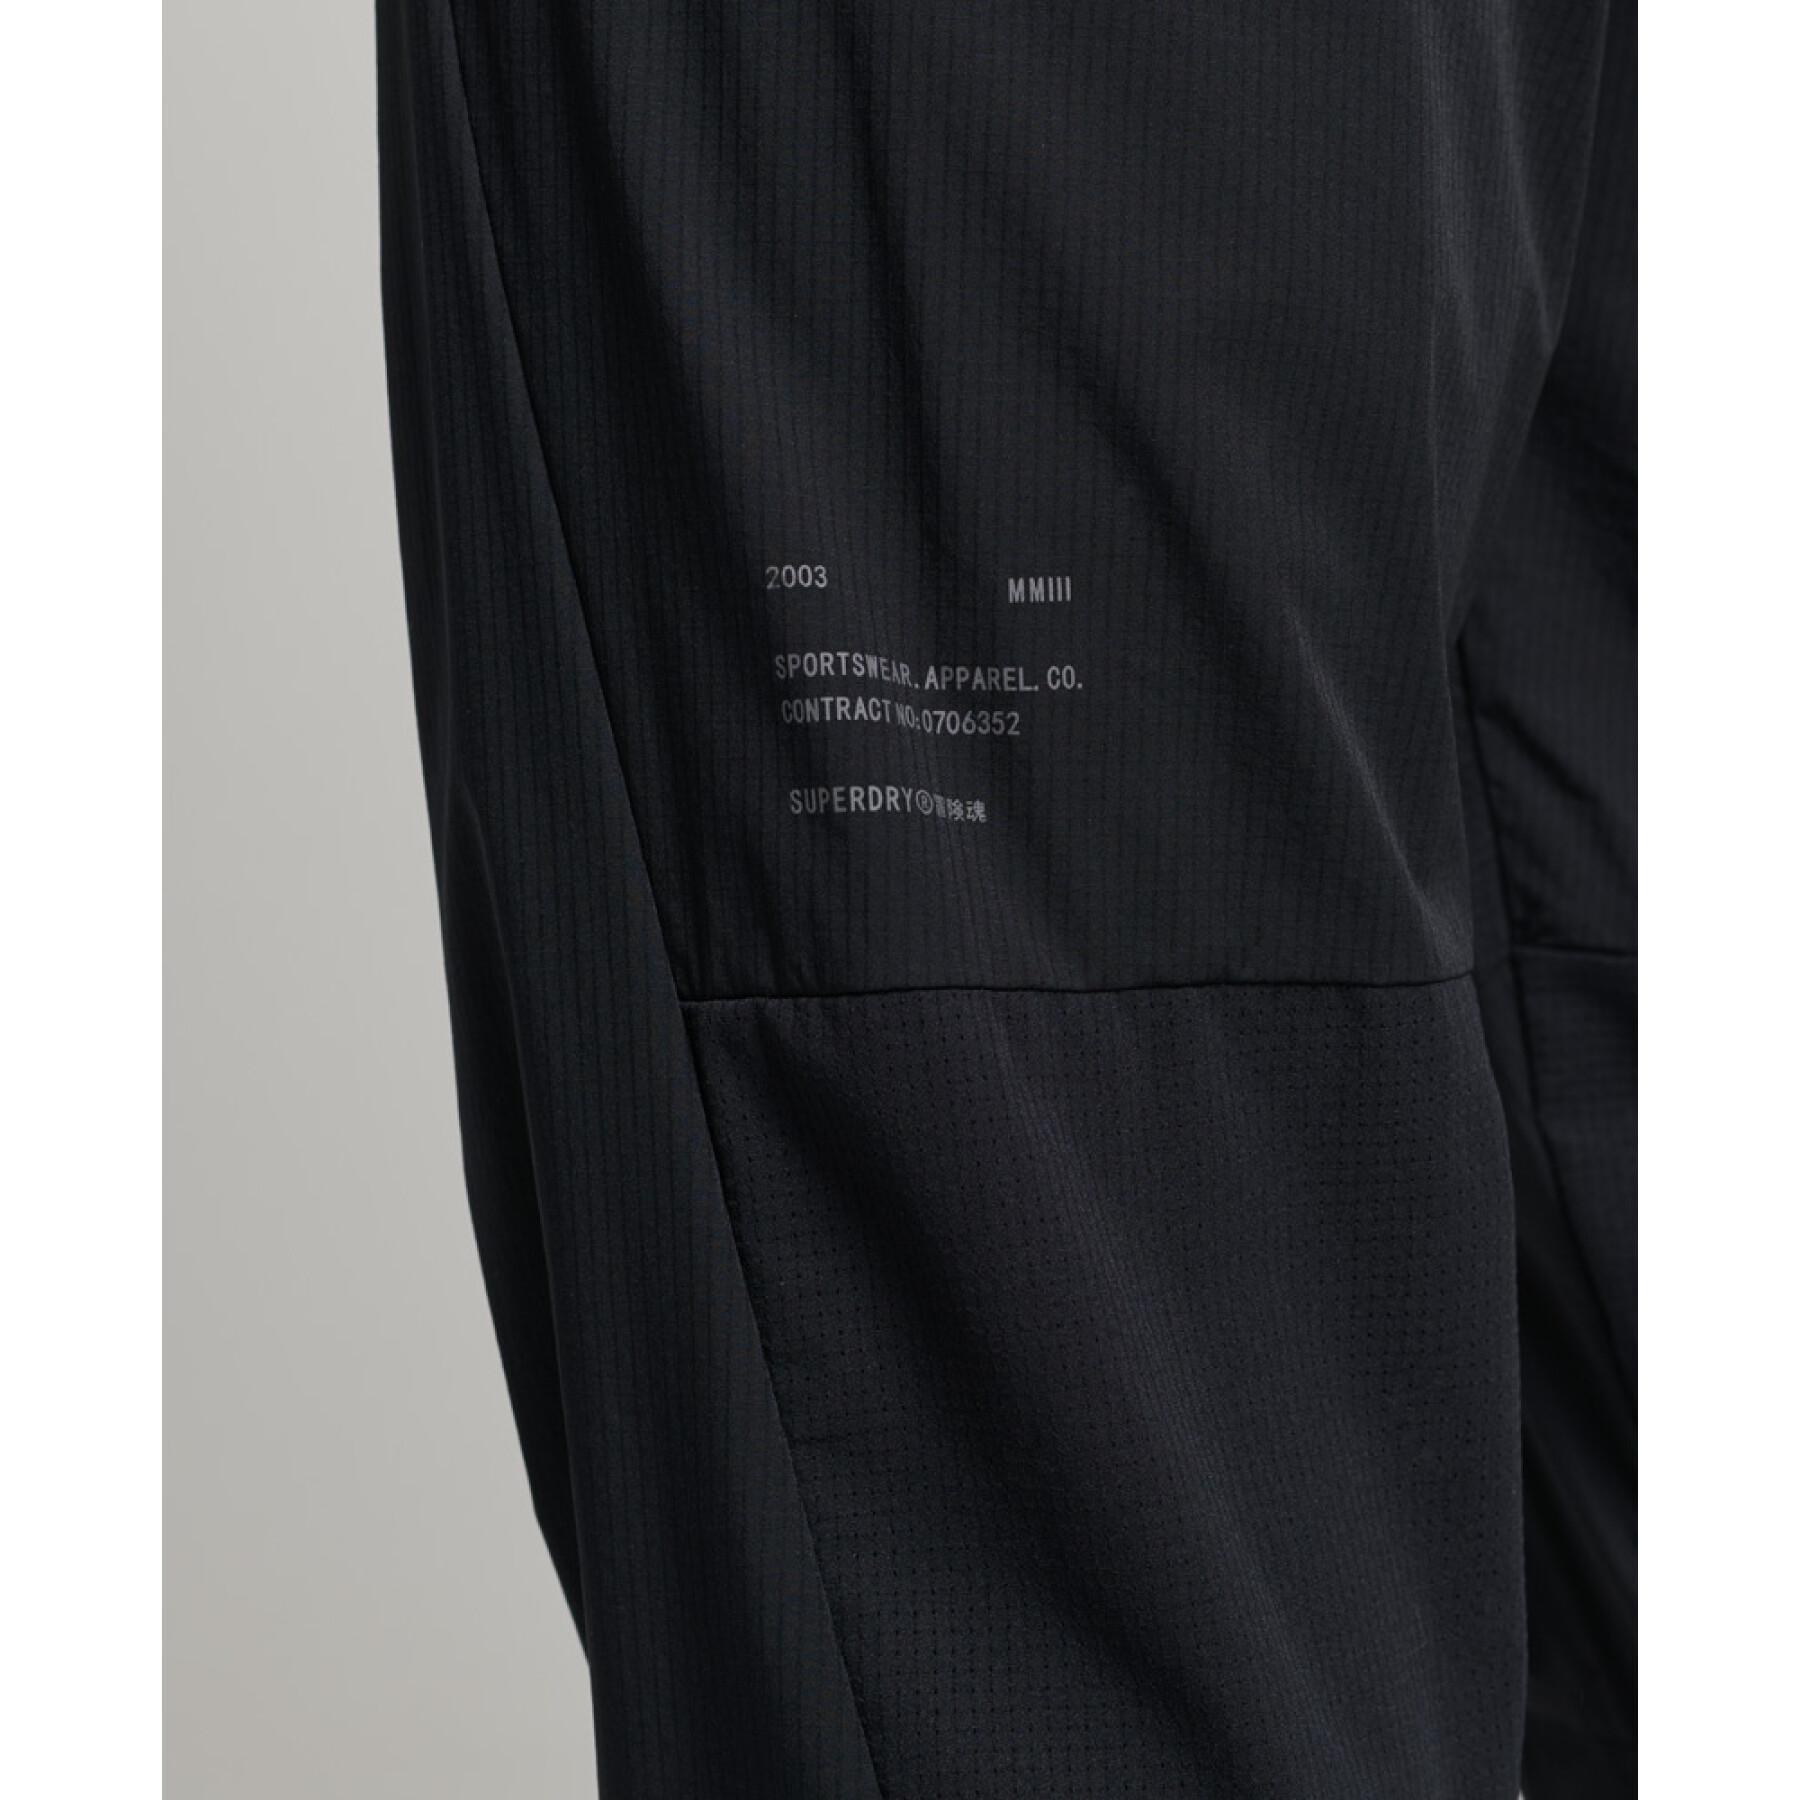 Straight woven jogging suit Superdry